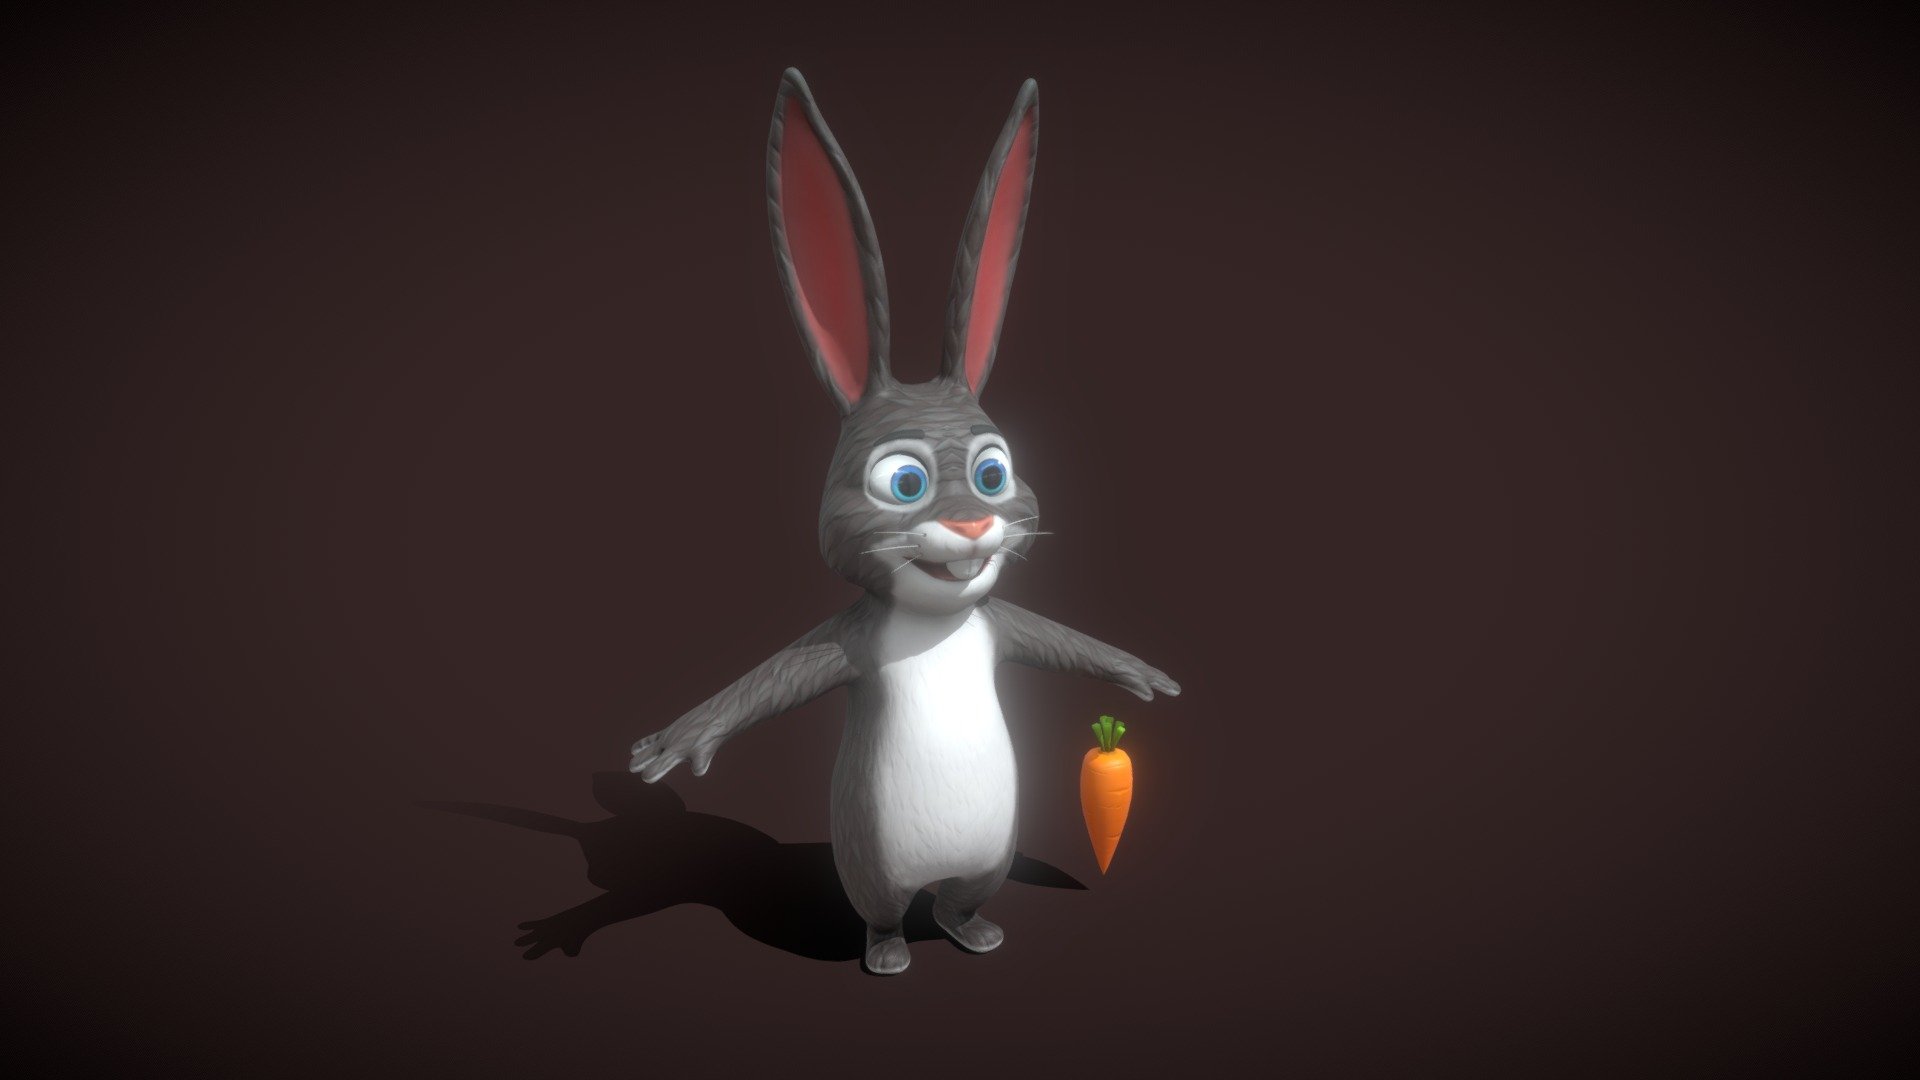 Cartoon Rabbit Rigged 3D Model is completely ready to be used in your games, animations, films, designs etc.  

All textures and materials are included and mapped in every format. The model is completely ready for use visualization in any 3d software and engine.  

Technical details:   




File formats included in the package are: FBX, OBJ, GLB, ABC, DAE, PLY, STL, BLEND, gLTF (generated), USDZ (generated)

Native software file format: BLEND

Render engine: Eevee

Polygons: 7,968

Vertices: 7,922

Carrot is included - polygons: 706, vertices: 722

Textures: Color, Metallic, Roughness, Normal, AO.

All textures are 2k resolution.

The model is rigged.

We have another model with animations.
 - Cartoon Rabbit Rigged 3D Model - Buy Royalty Free 3D model by 3DDisco 3d model